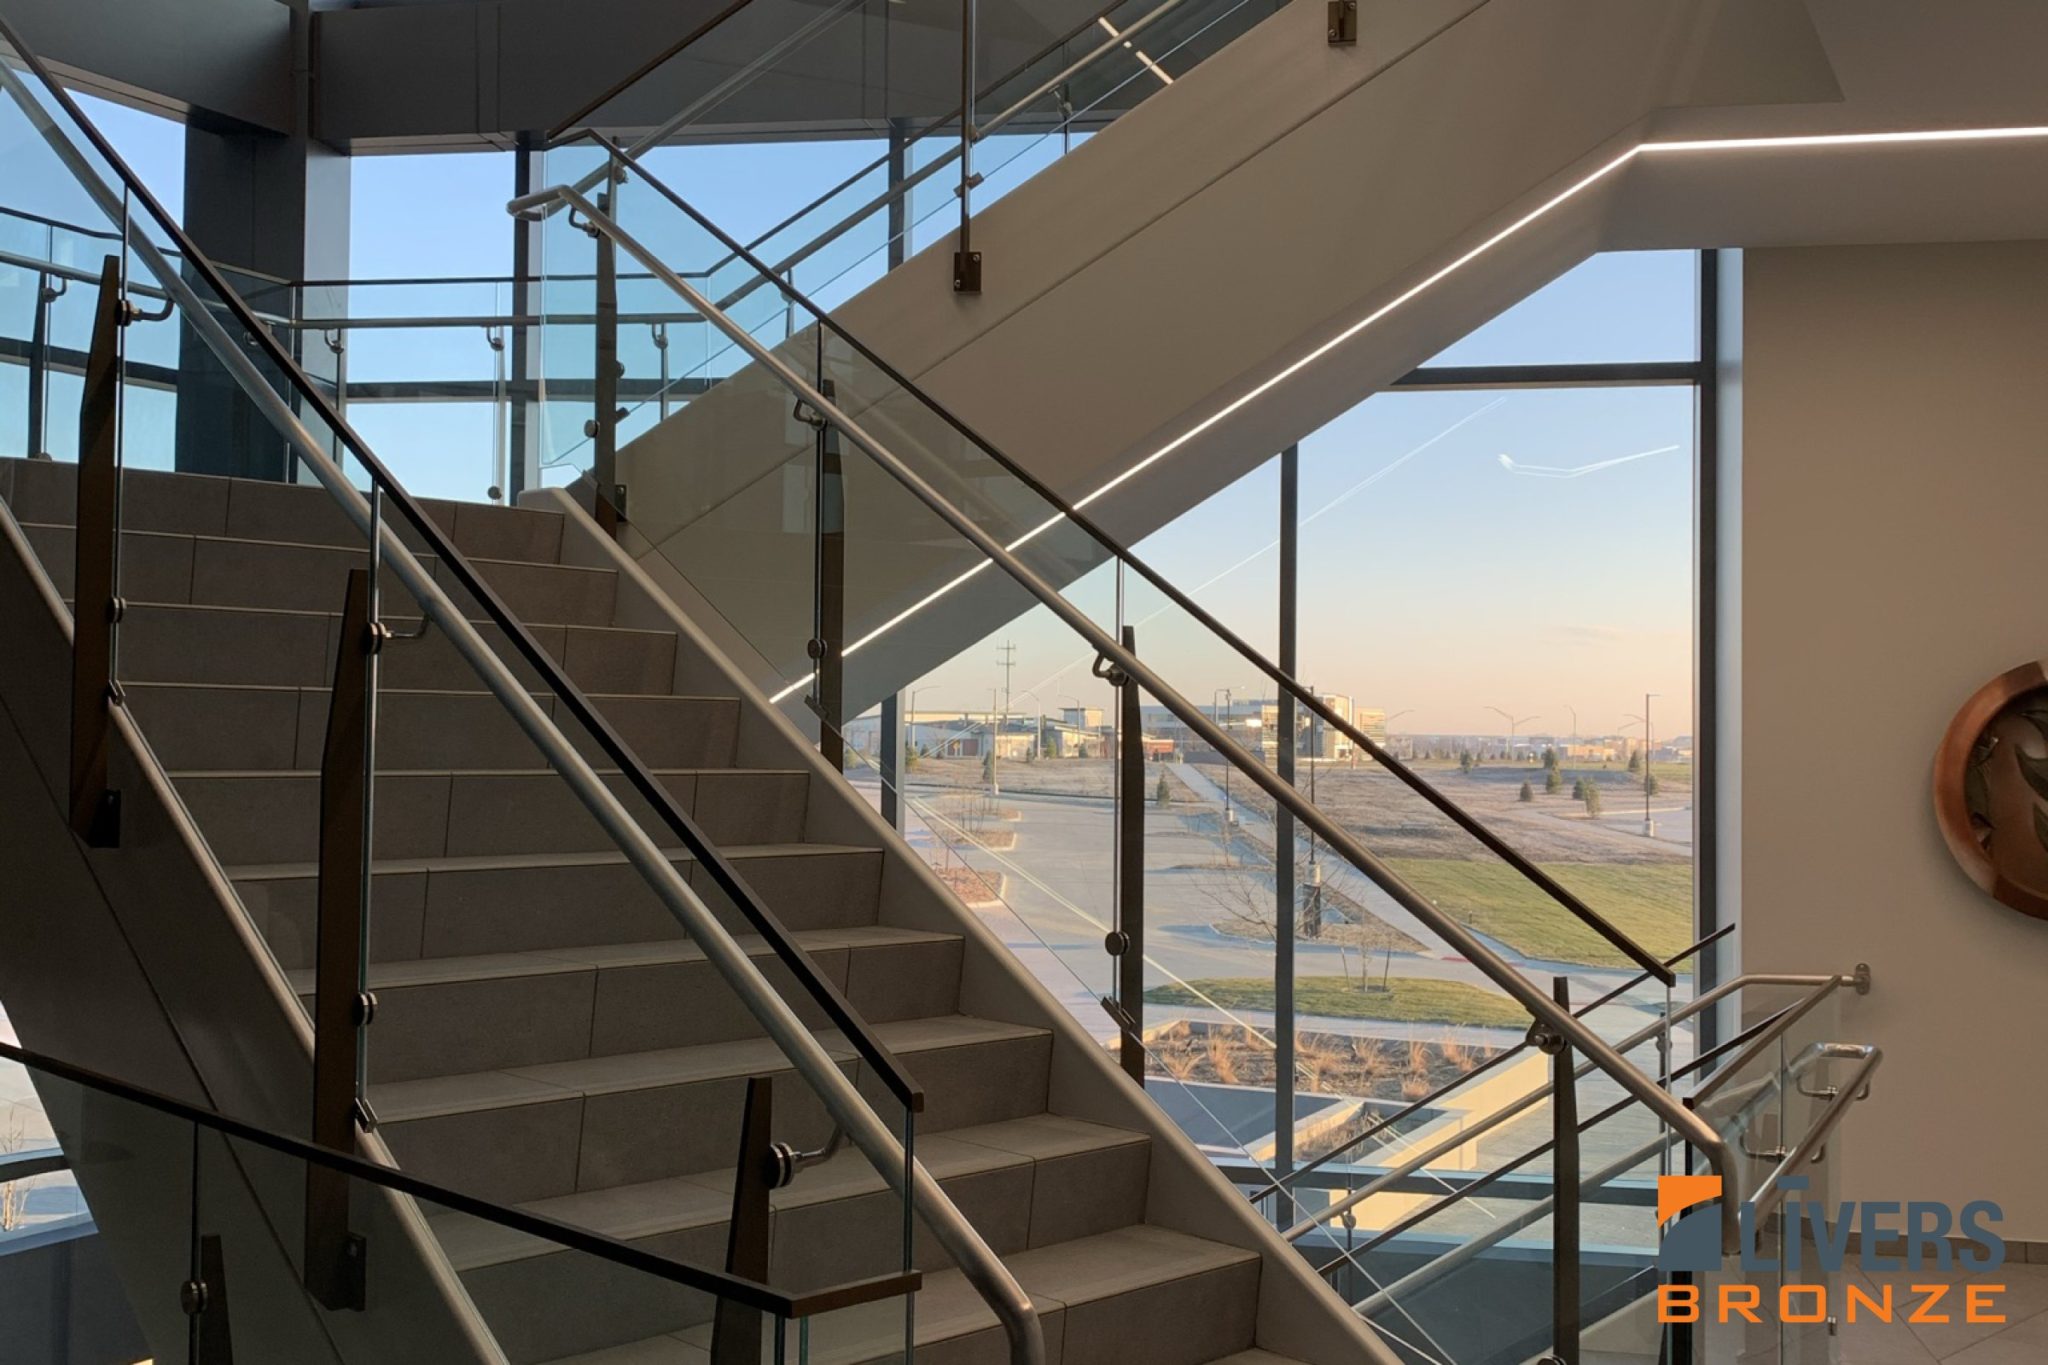 Livers Bronze Belmont Stainless Steel Railings with Powder Coated Railing Posts were installed at the office lobby stairs at Sammons Financial Headquarters, Des Moines, Iowa, and were Made in the USA.